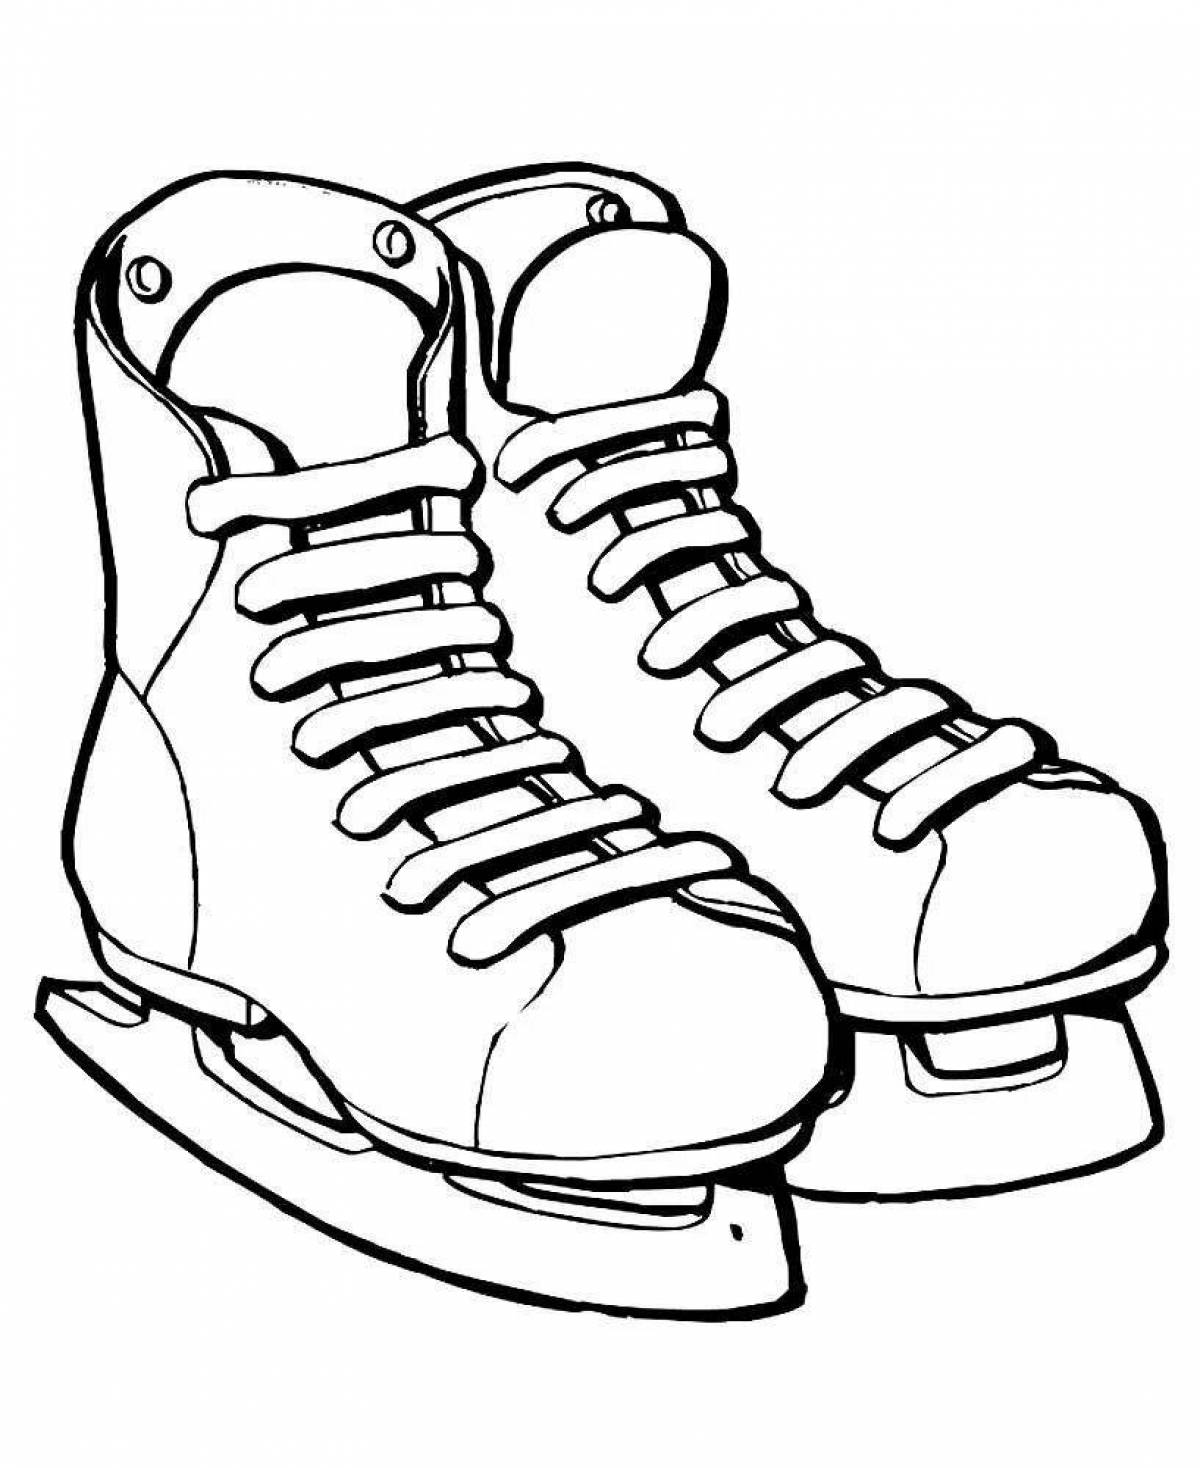 Cute skate coloring page